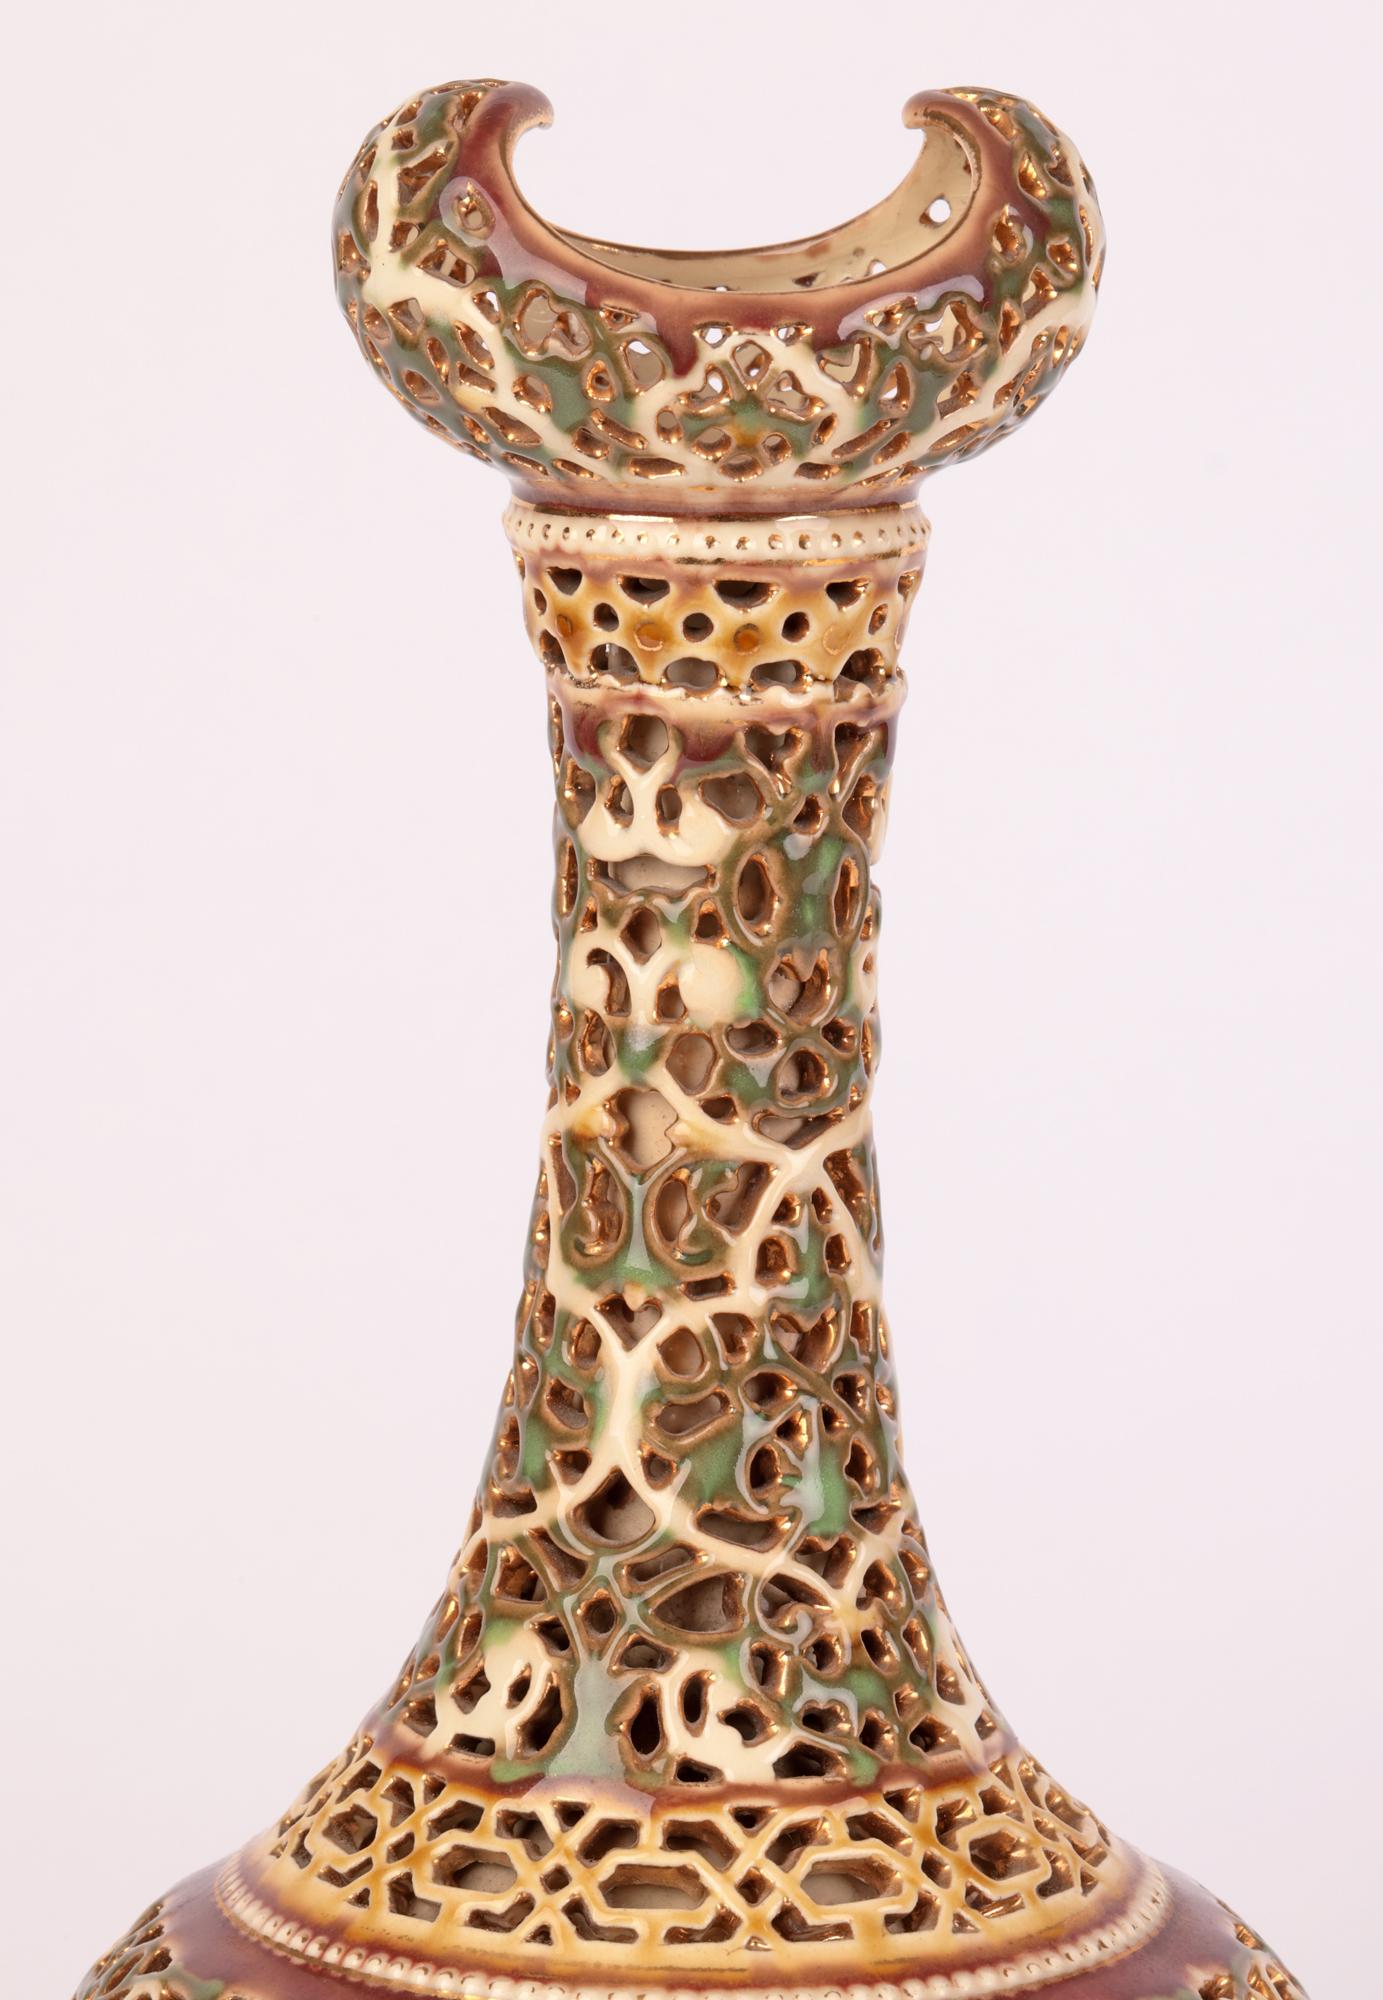 A stylish and elegant Hungarian ceramic vase of Islamic style and shape with pierced designs by renowned maker Zsolnay Pecs and dating from around 1890. This impressive vase stands raised on a narrow round pedestal base with a round onion shape body